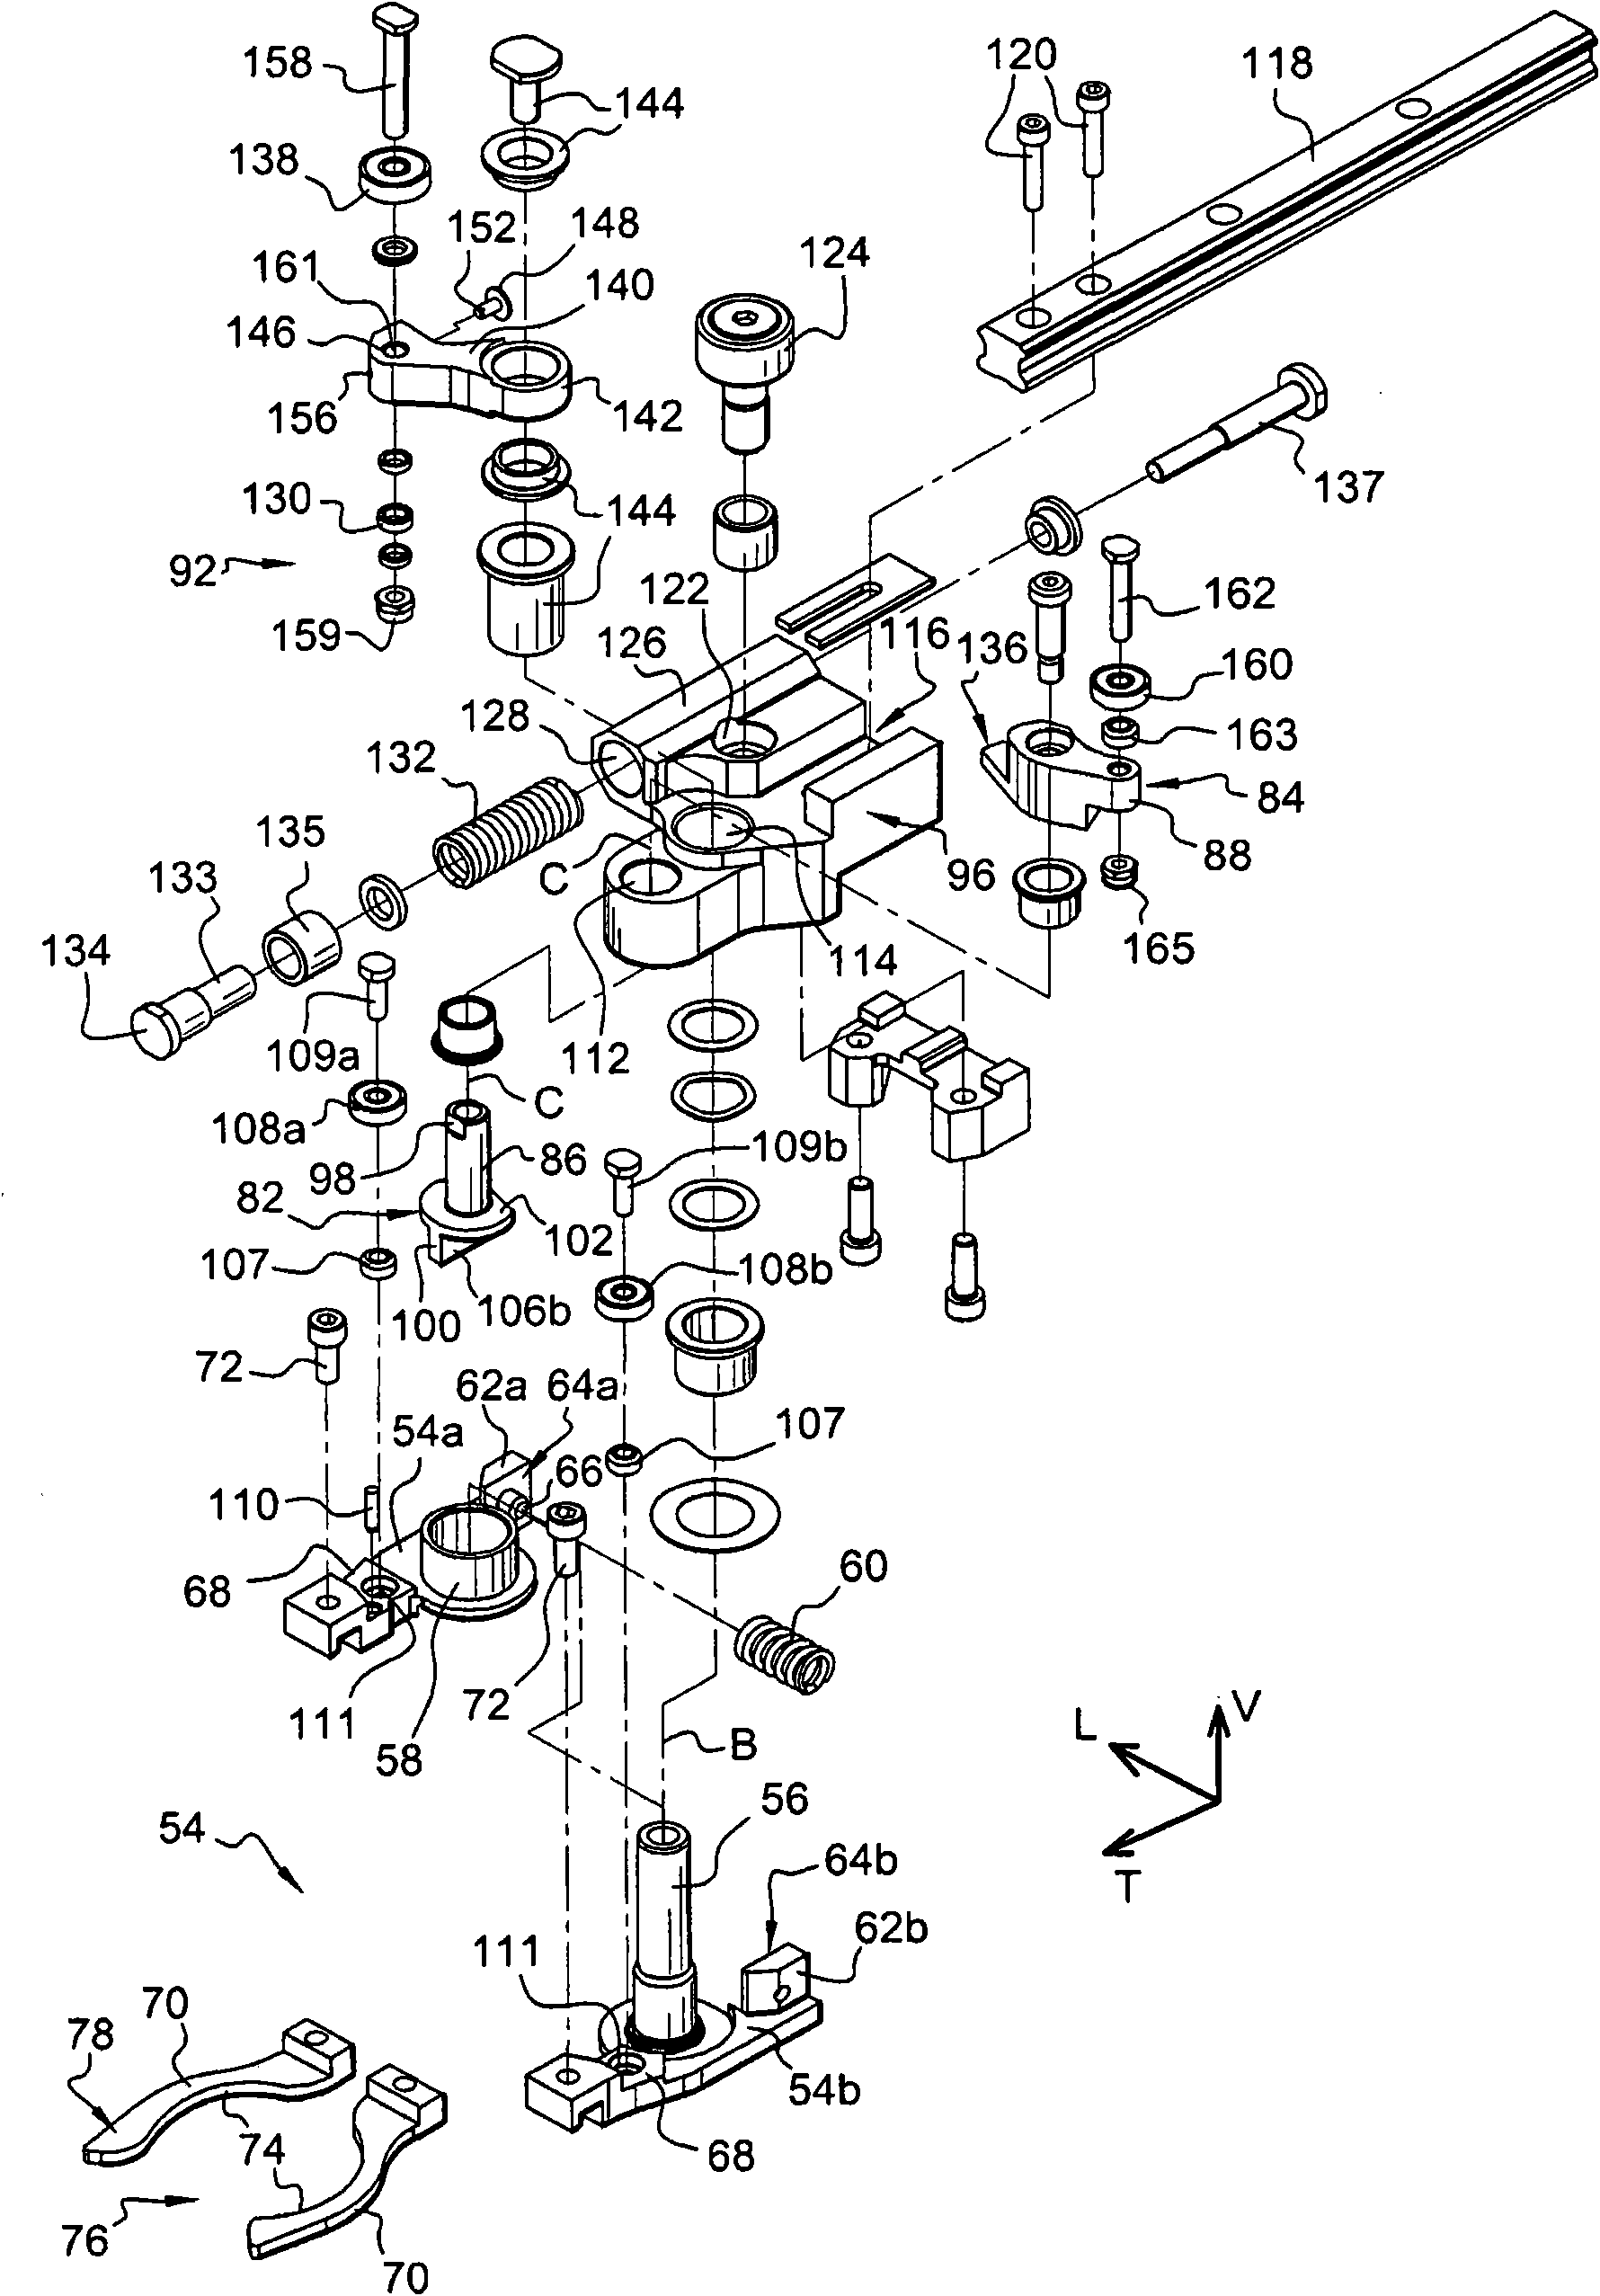 Transfer device and linear-type apparatus for the manufacture of containers